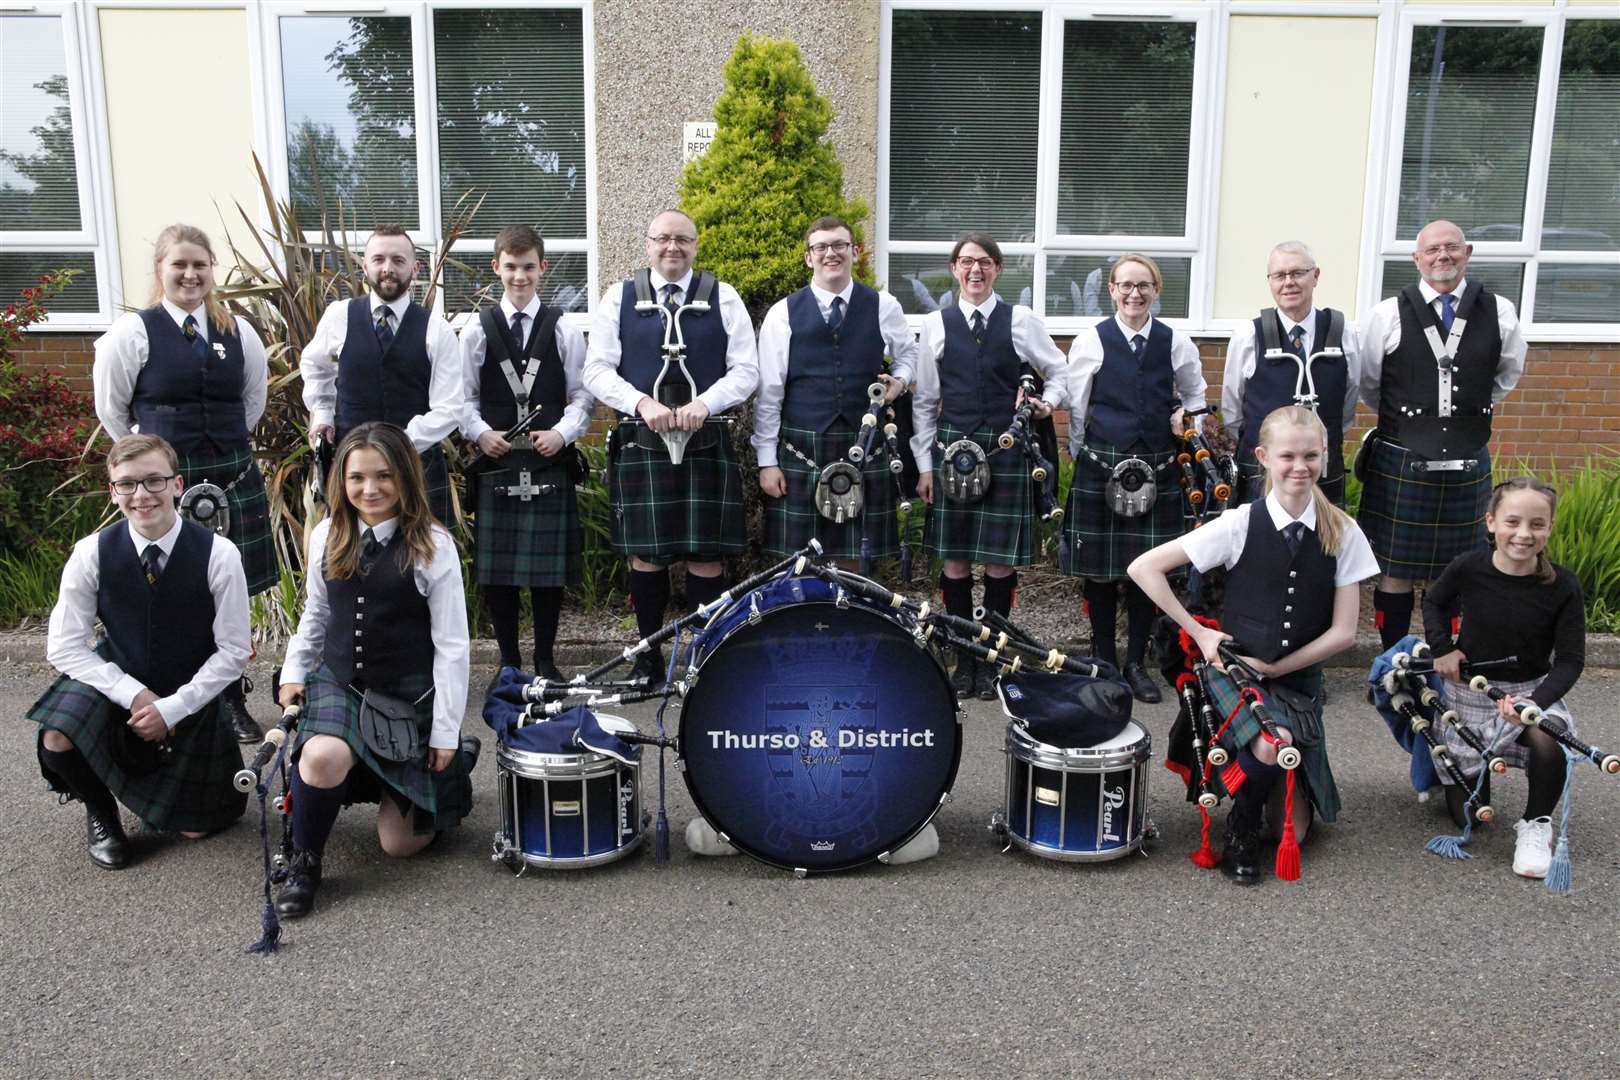 Thurso Pipe Band welcomed everybody to the evening.